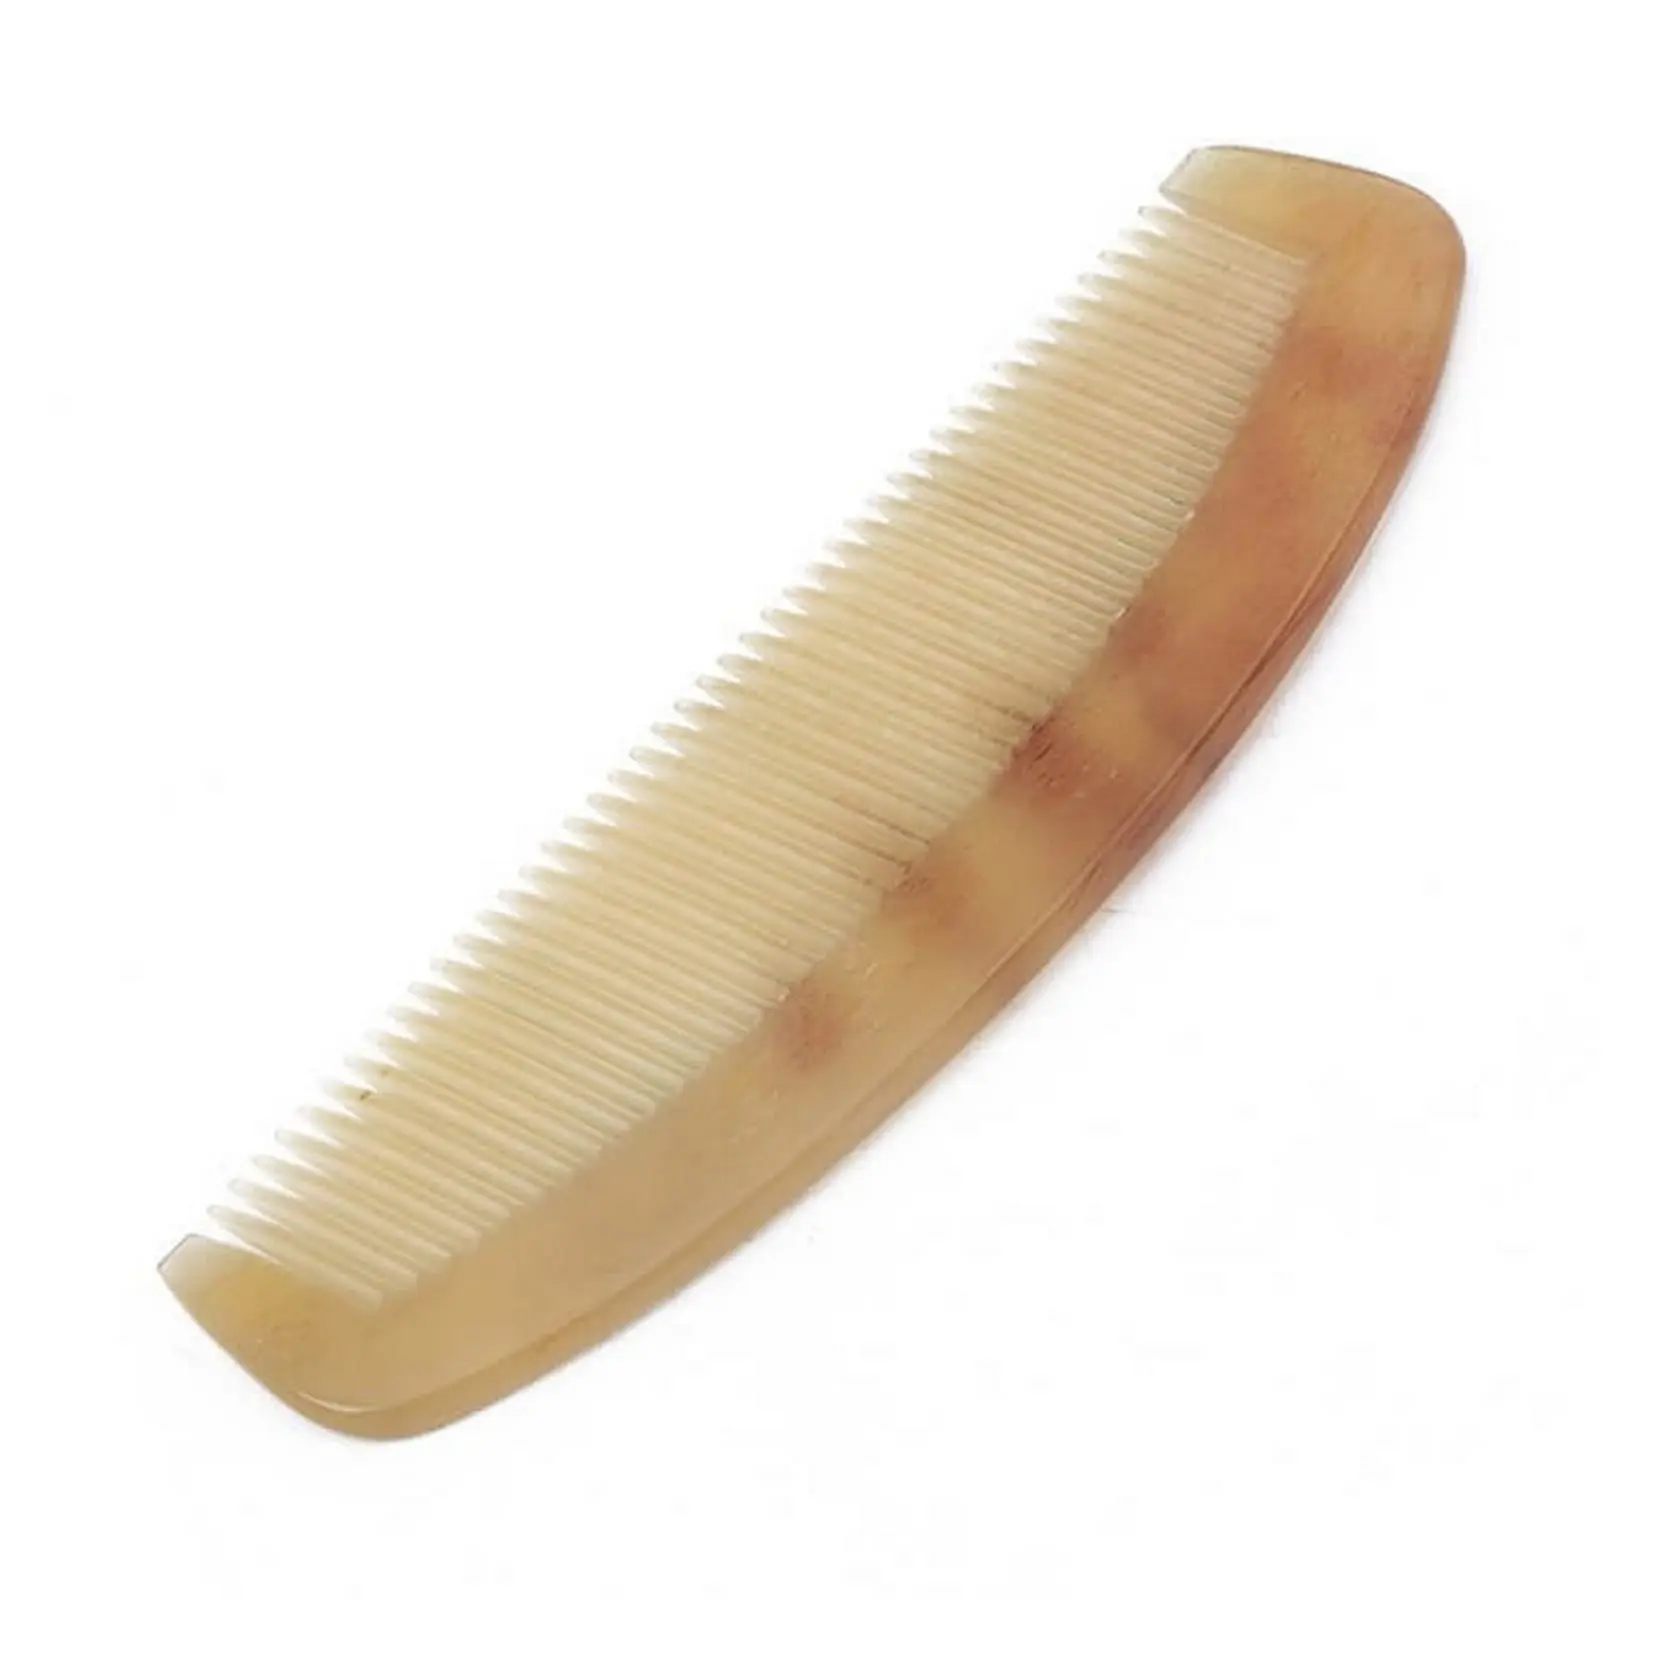 high quality customized handcrafted natural horn comb for styling hair made from real buffalo horn from India,.